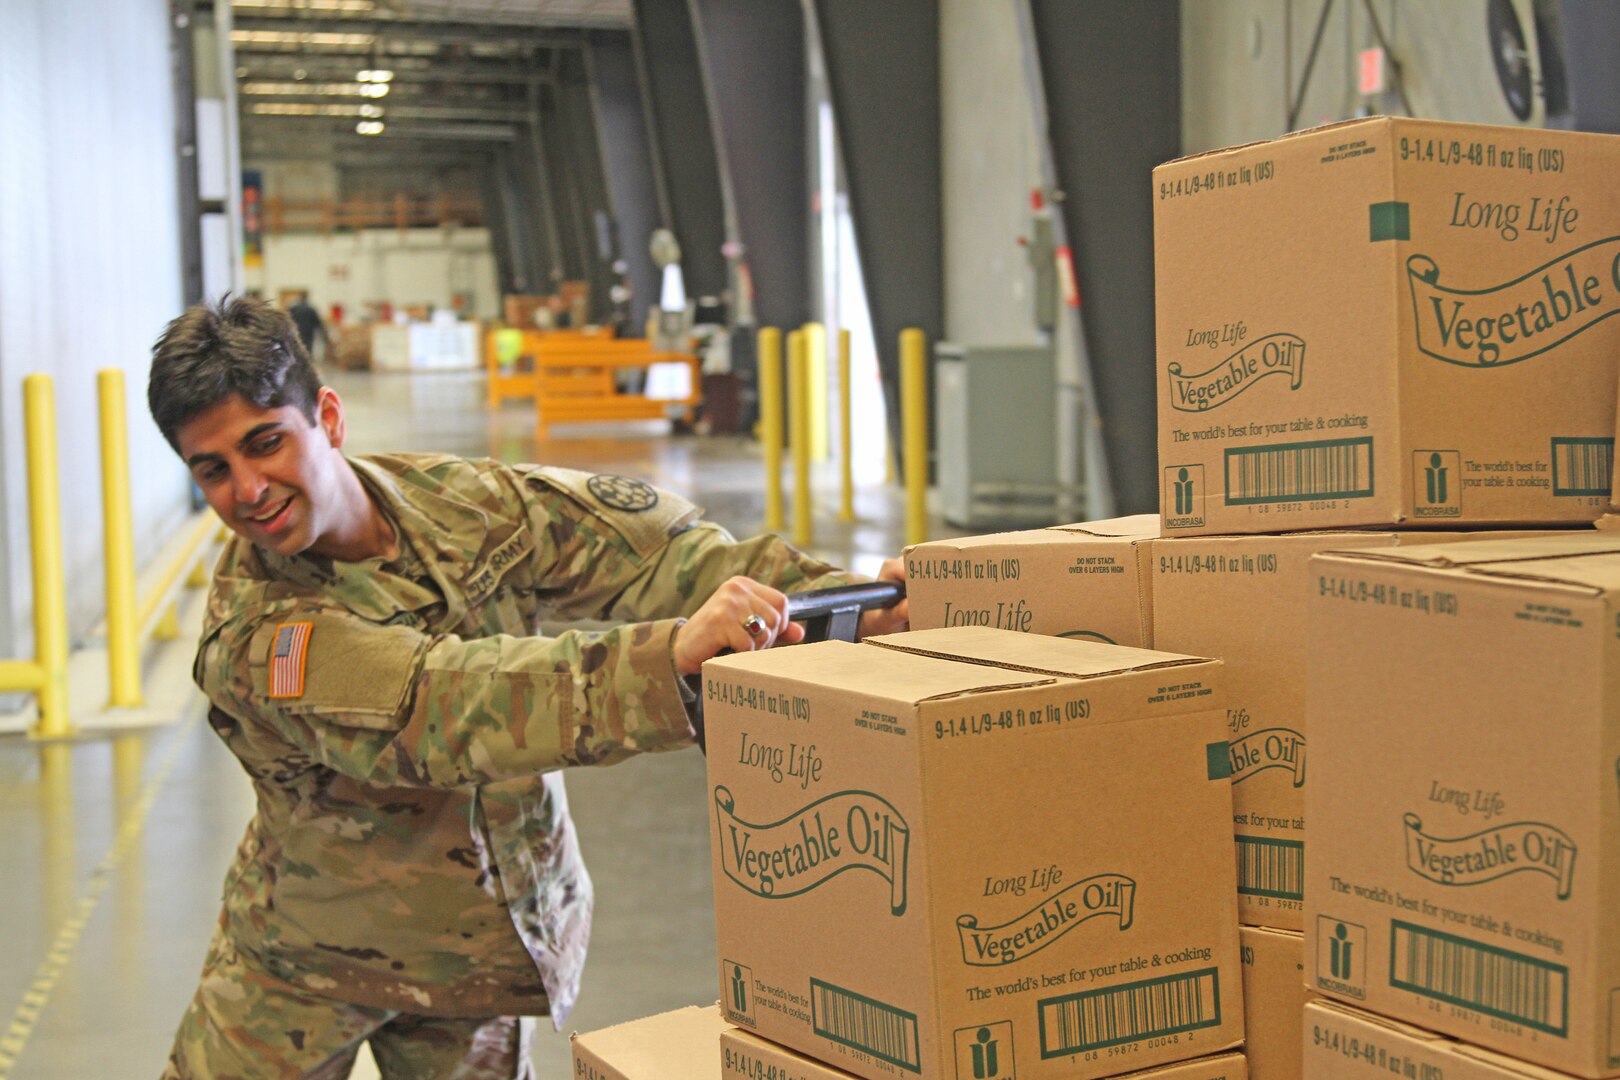 His military career is only weeks-old, but California Army National Guard Pfc. Muhammad Fayzan Izhar is embracing his work helping at a Sacramento food bank in response to the COVID-19 pandemic. The Pakistan native completed his initial entry training in February.